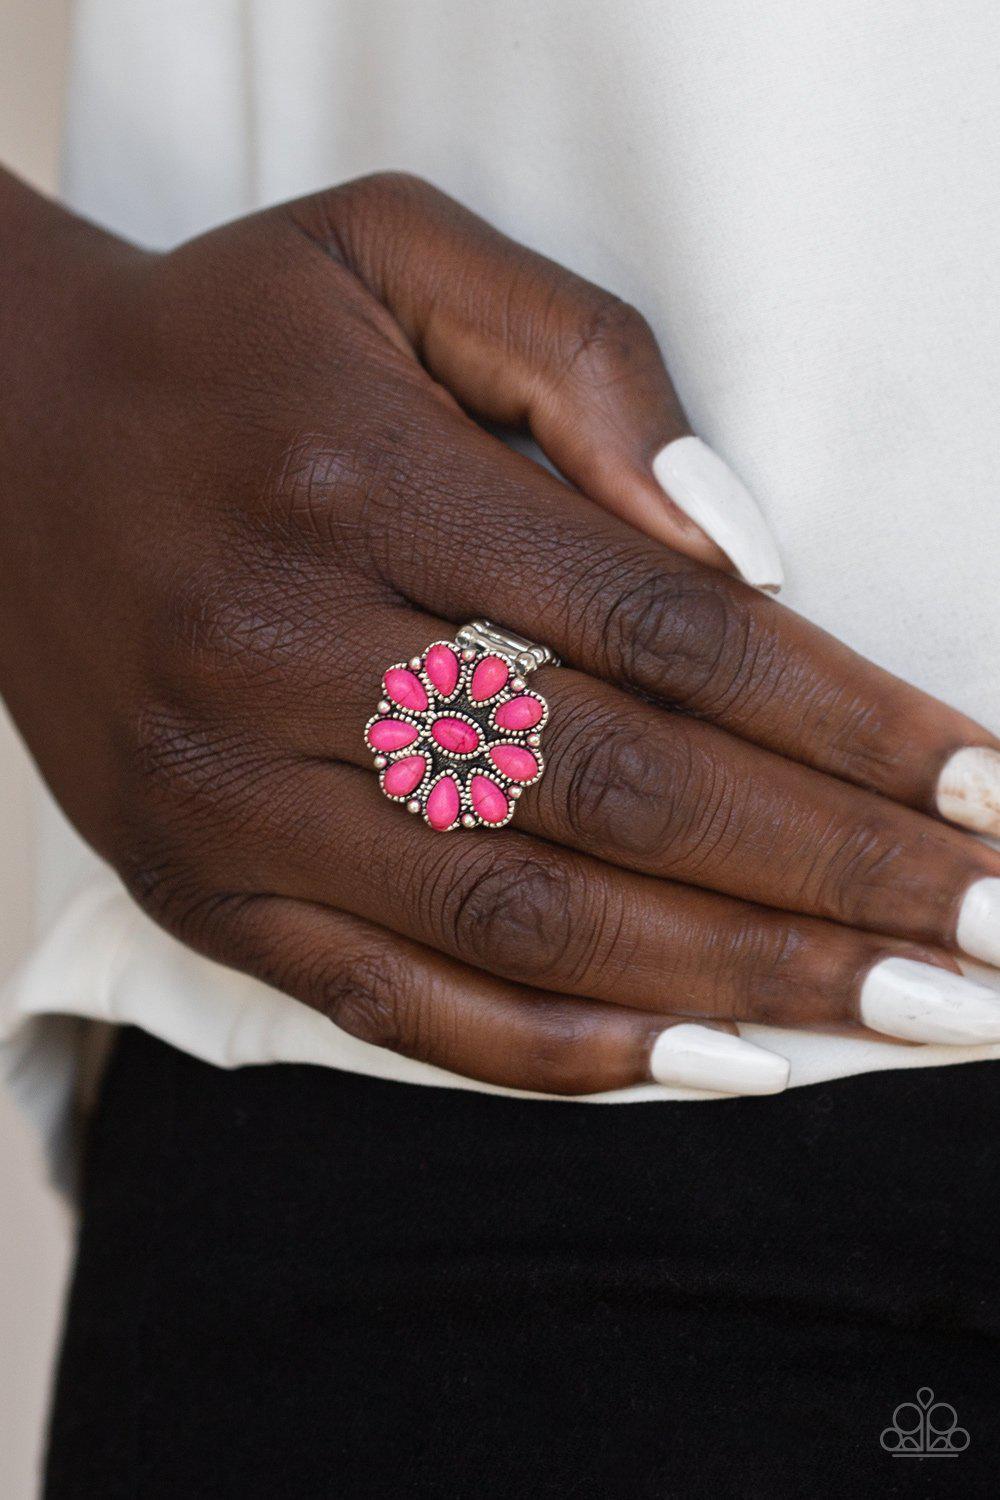 Stone Gardenia Silver and Pink Stone Flower Ring - Paparazzi Accessories-CarasShop.com - $5 Jewelry by Cara Jewels